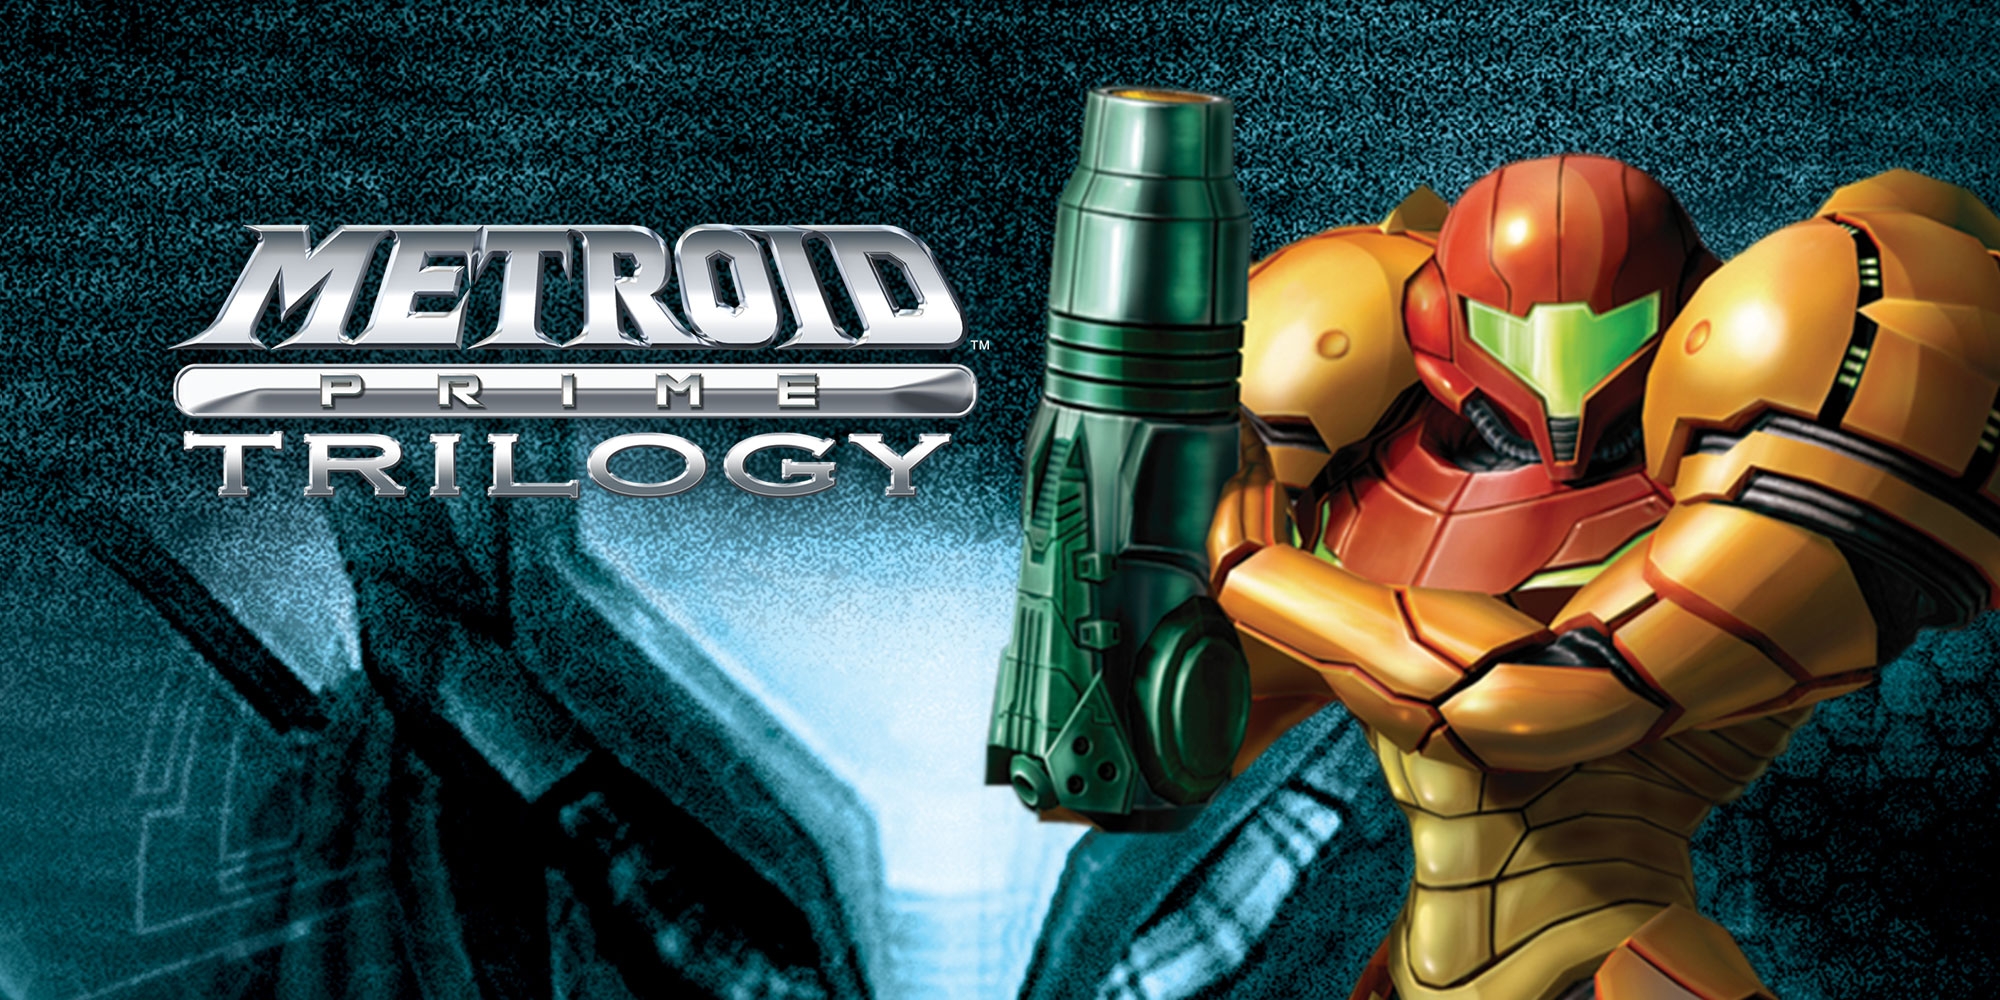 metroid-prime-trilogy-switch-cover.jpg